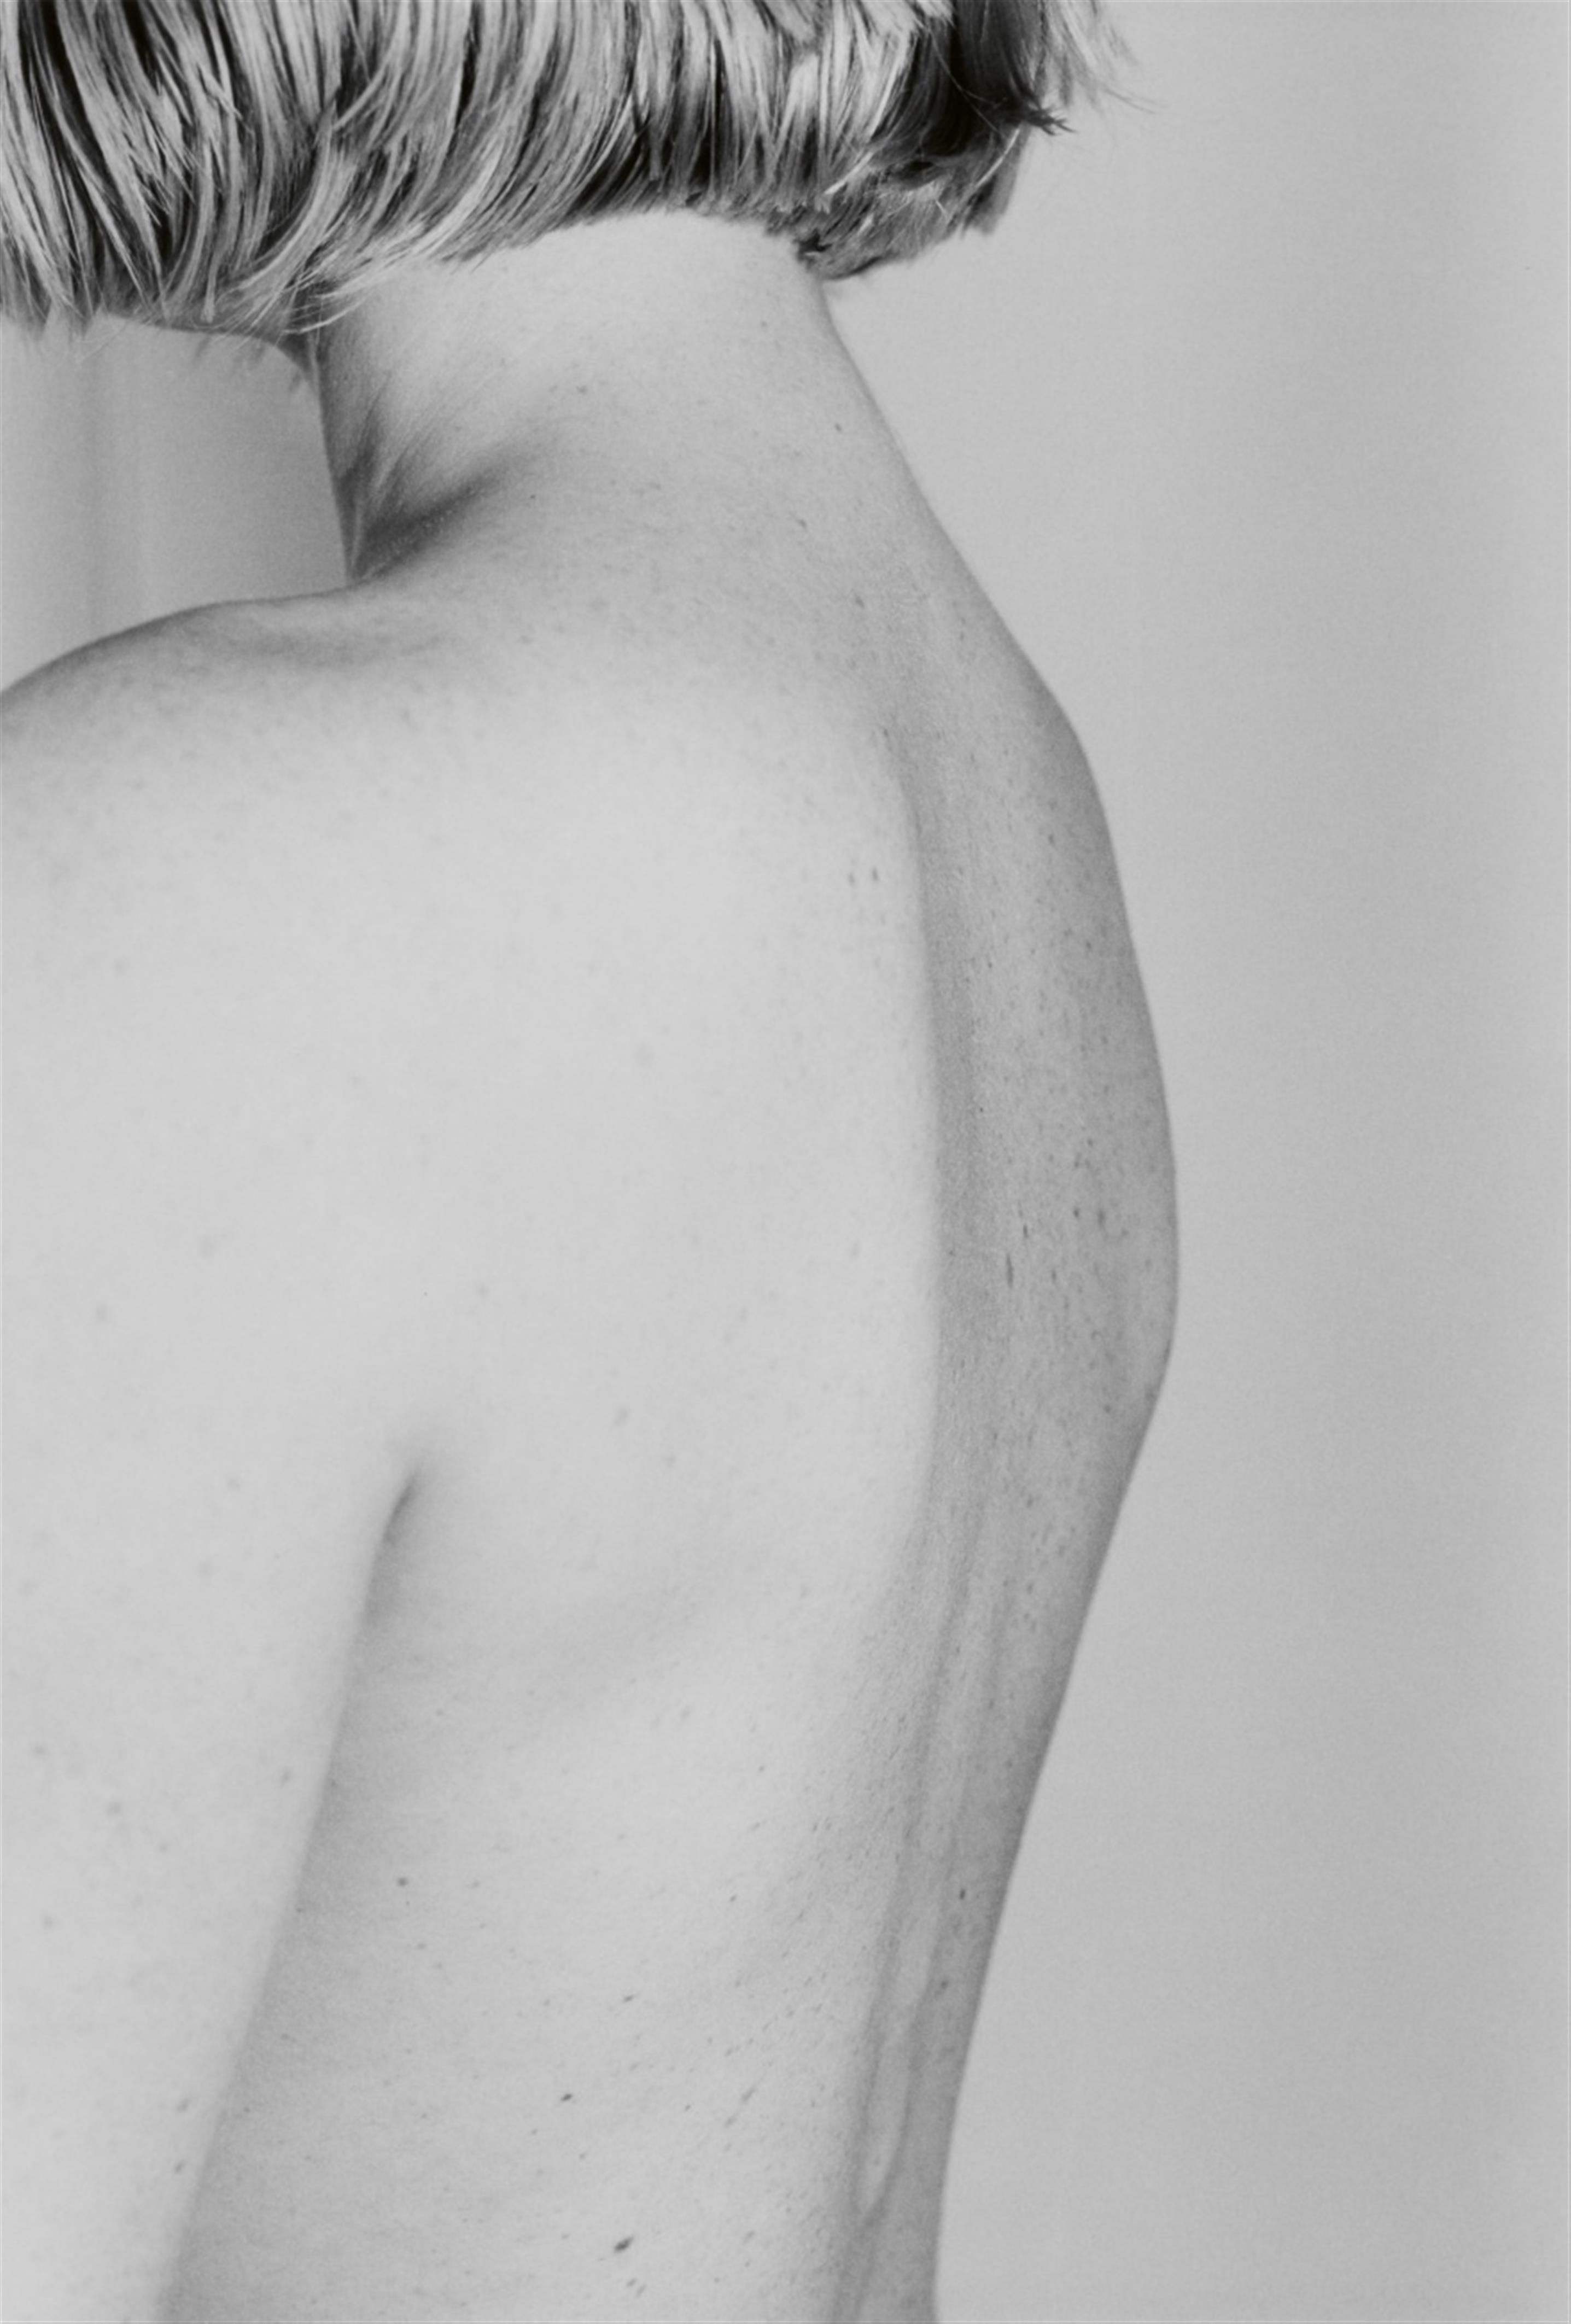 Michael Schmidt - Untitled (from the series: Frauen) - image-1